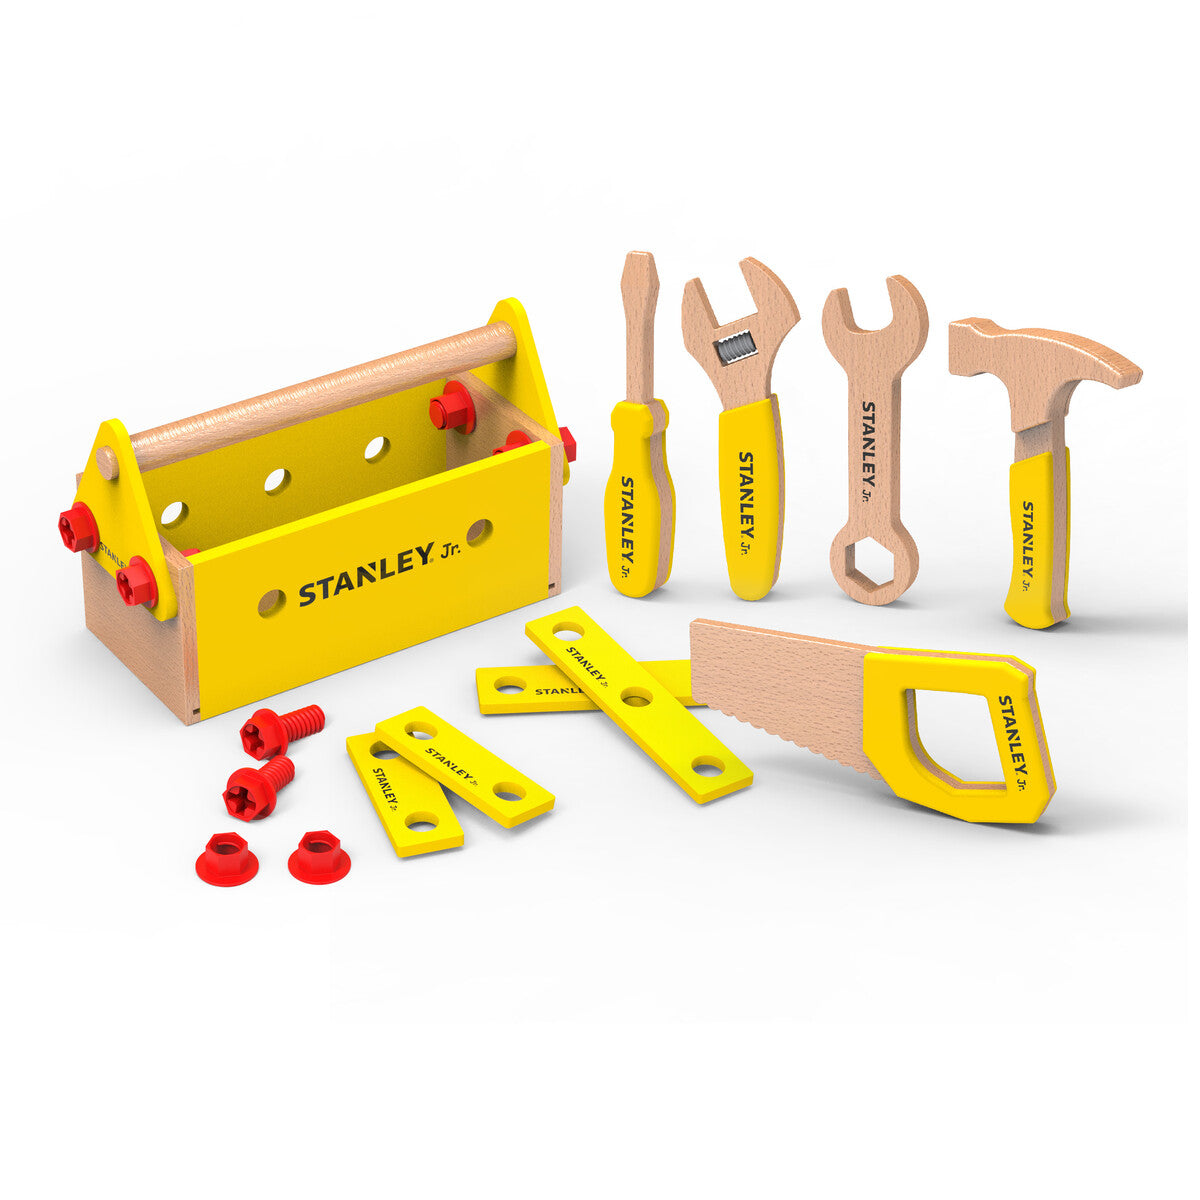 6: Stanley Jr. - Wooden Toolbox + hand tool (SWRP004-SY)